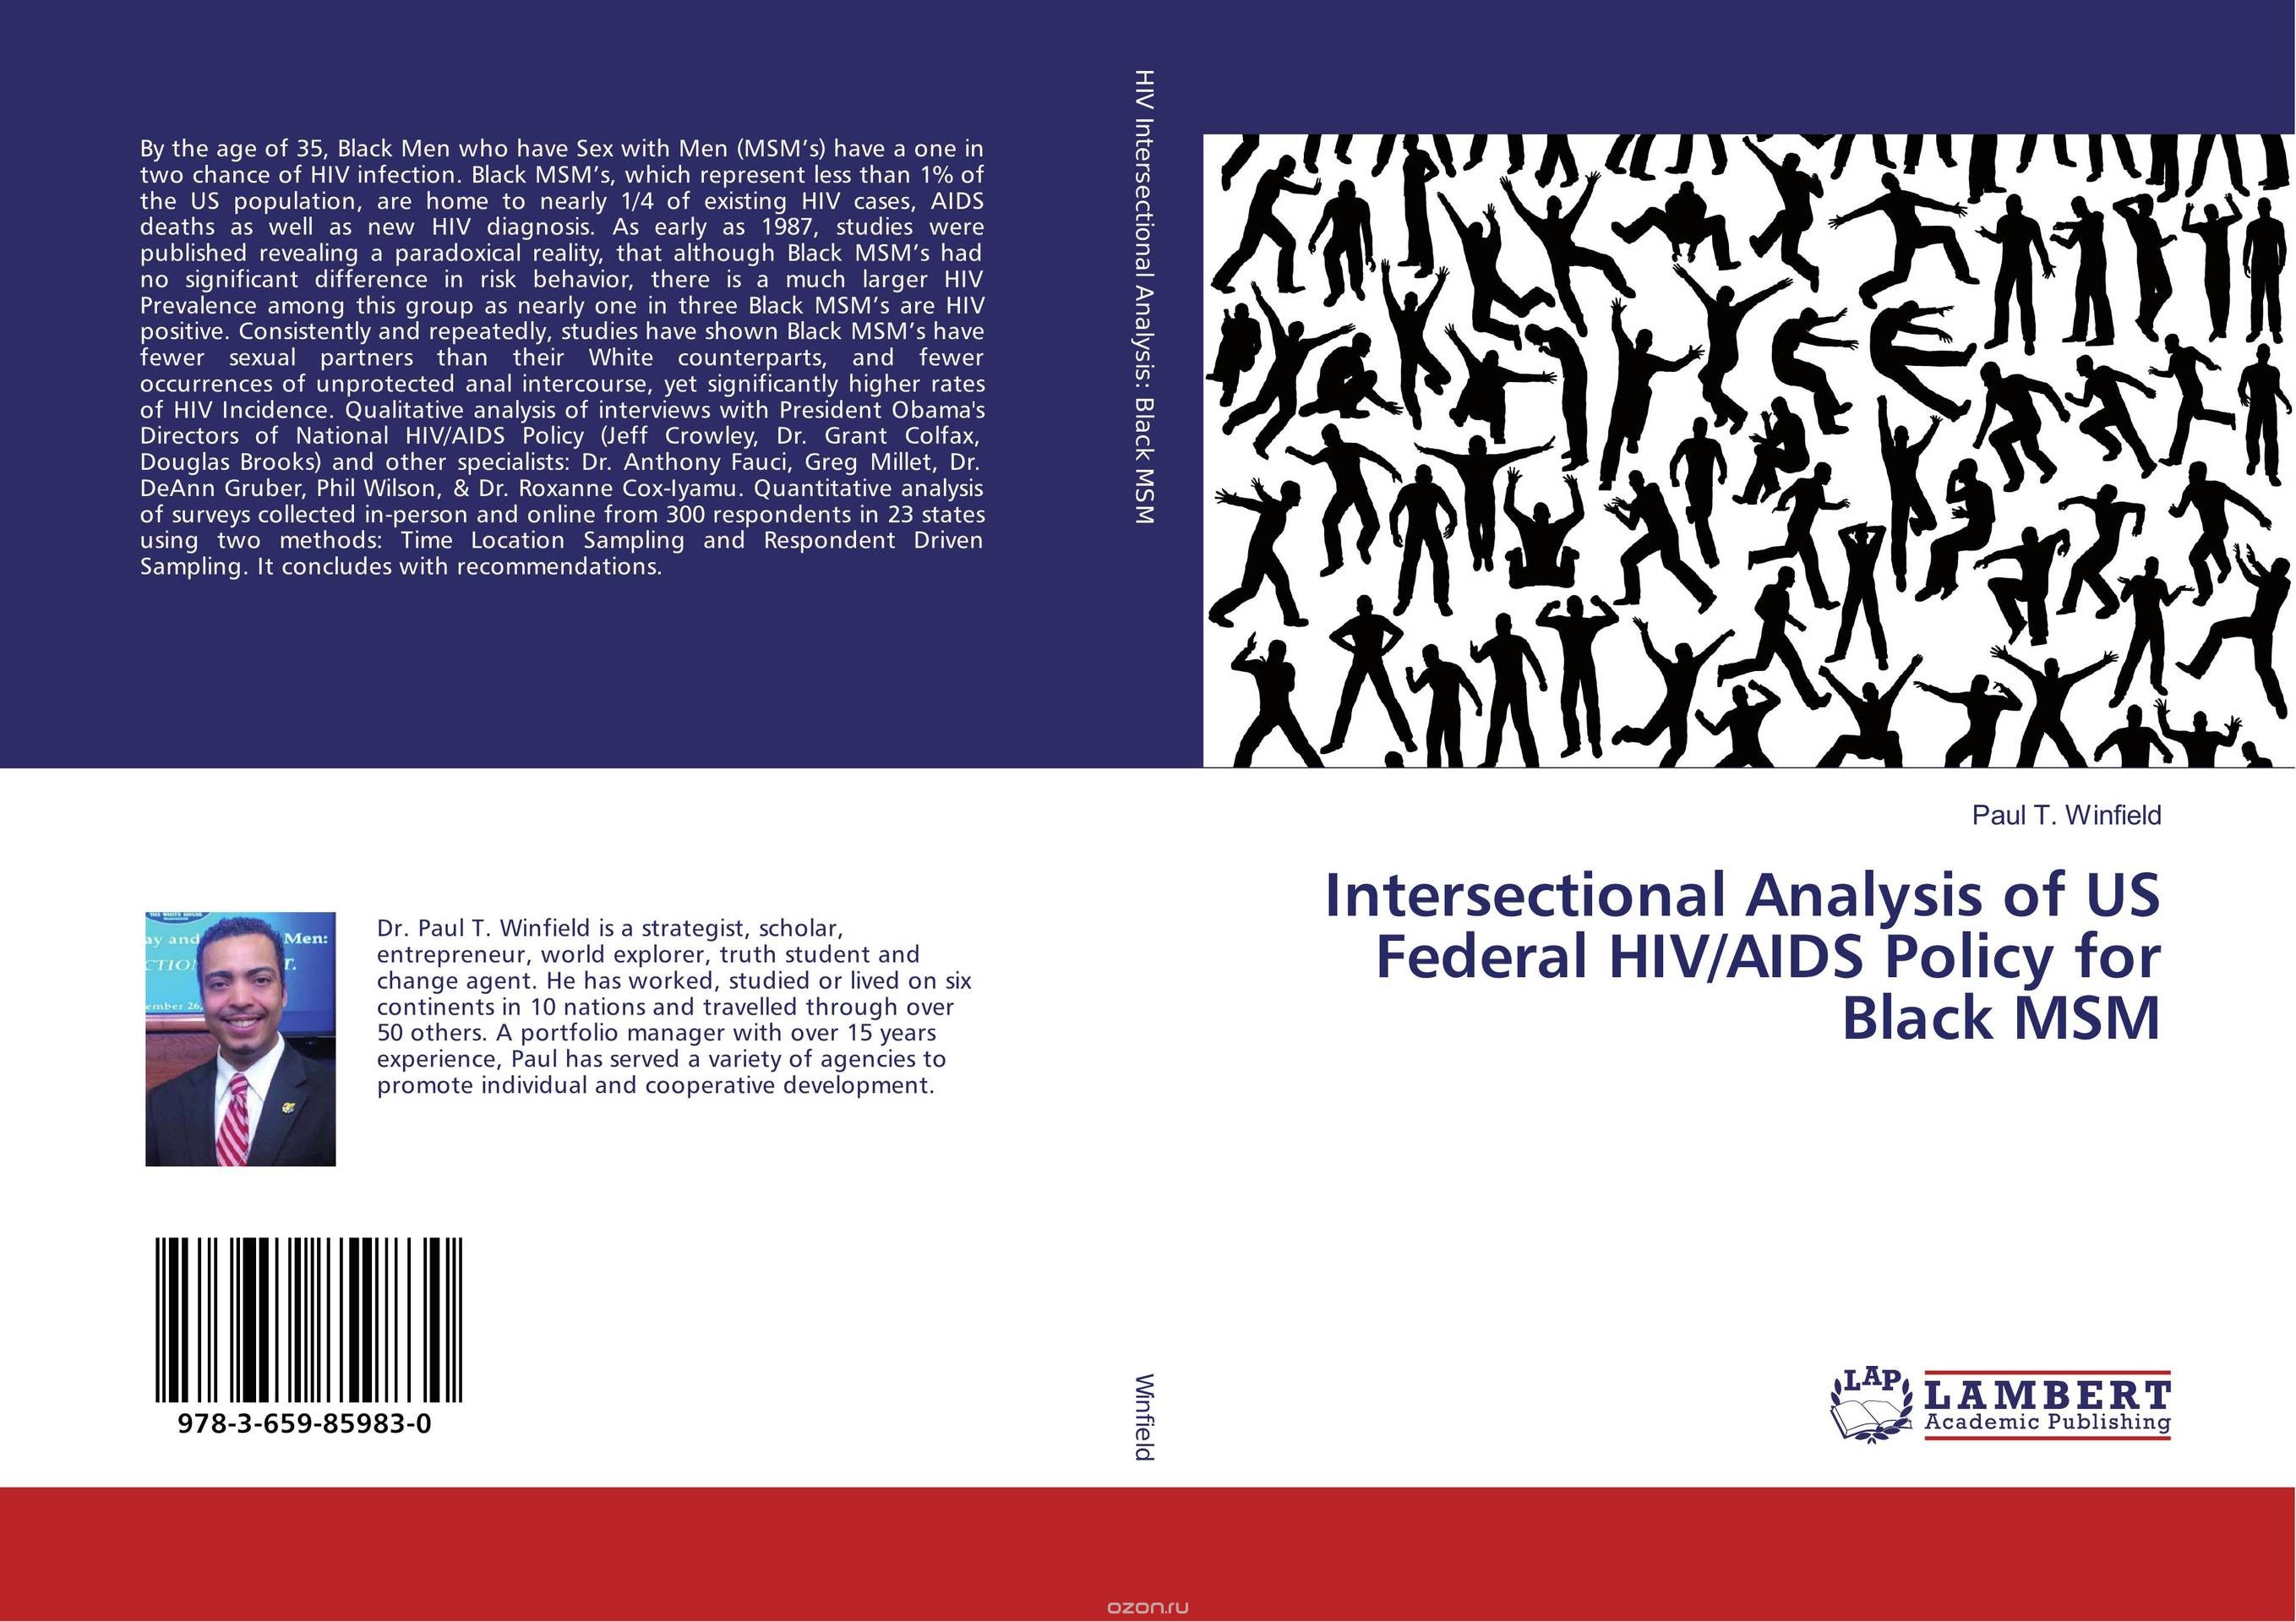 Скачать книгу "Intersectional Analysis of US Federal HIV/AIDS Policy for Black MSM"